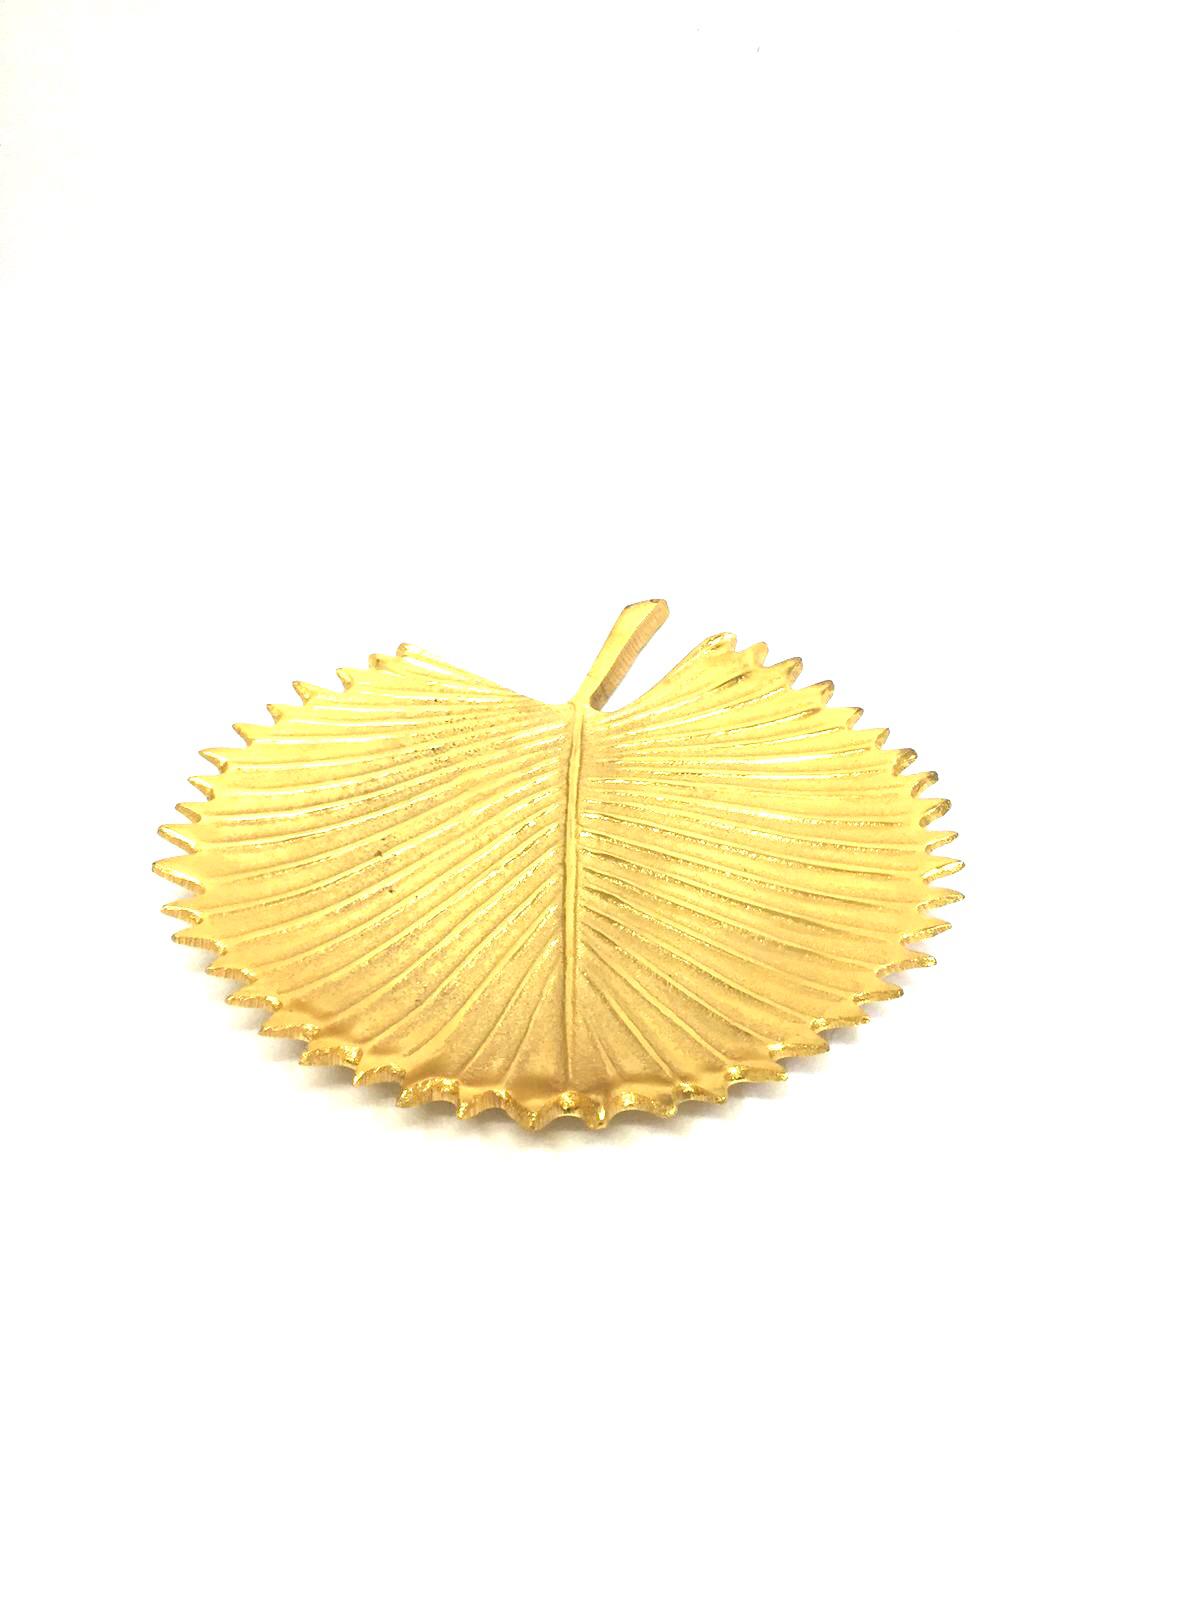 Golden Leaf Platter Metal Crafts Bring Attraction With Utility From Tamrapatra